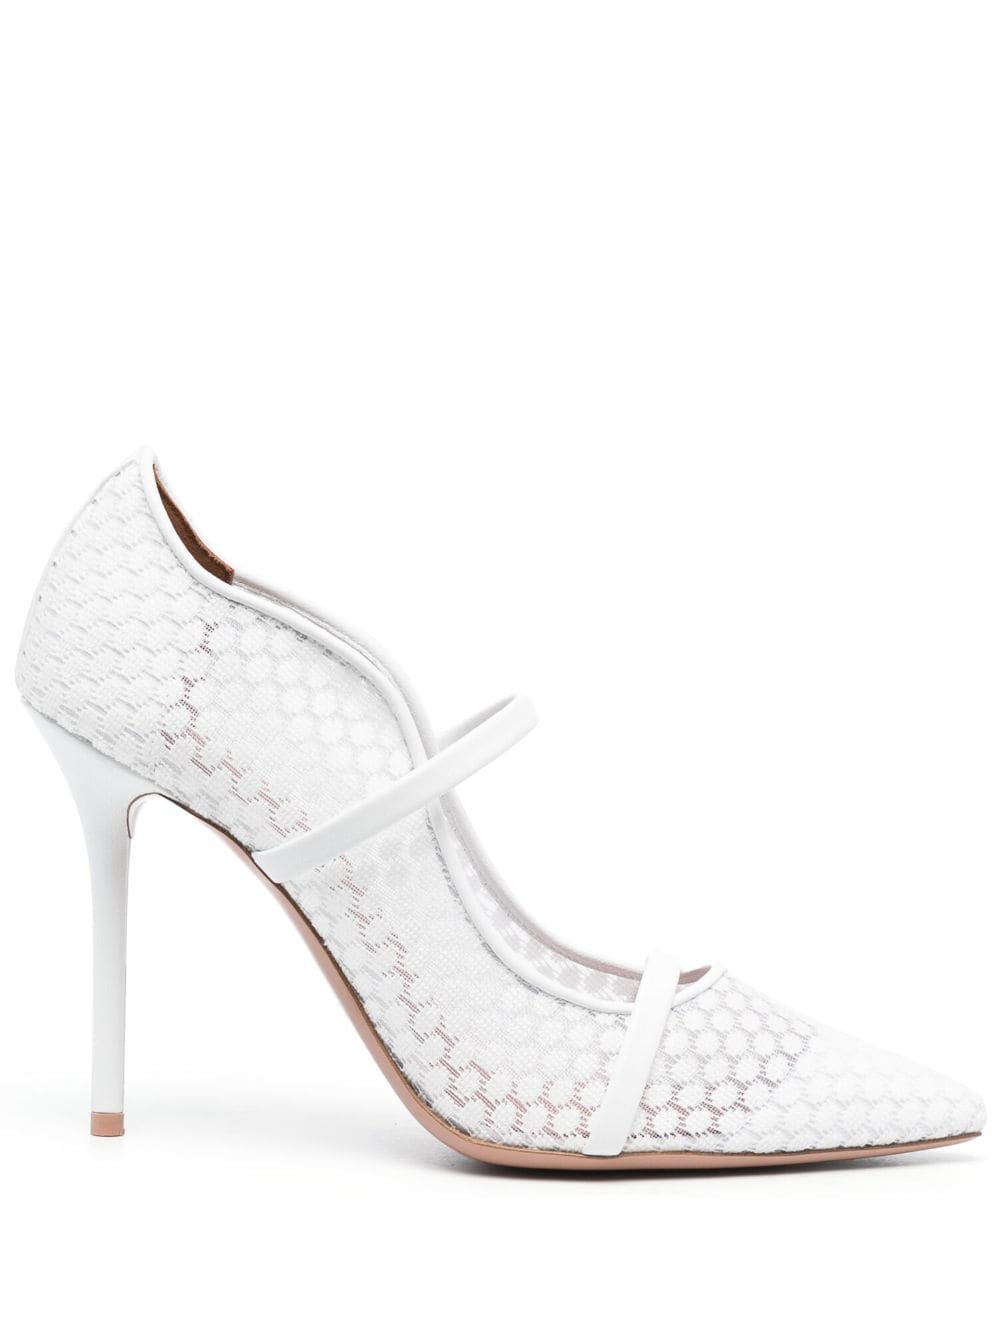 Malone Souliers Maureen 100mm lace pumps - White von Malone Souliers